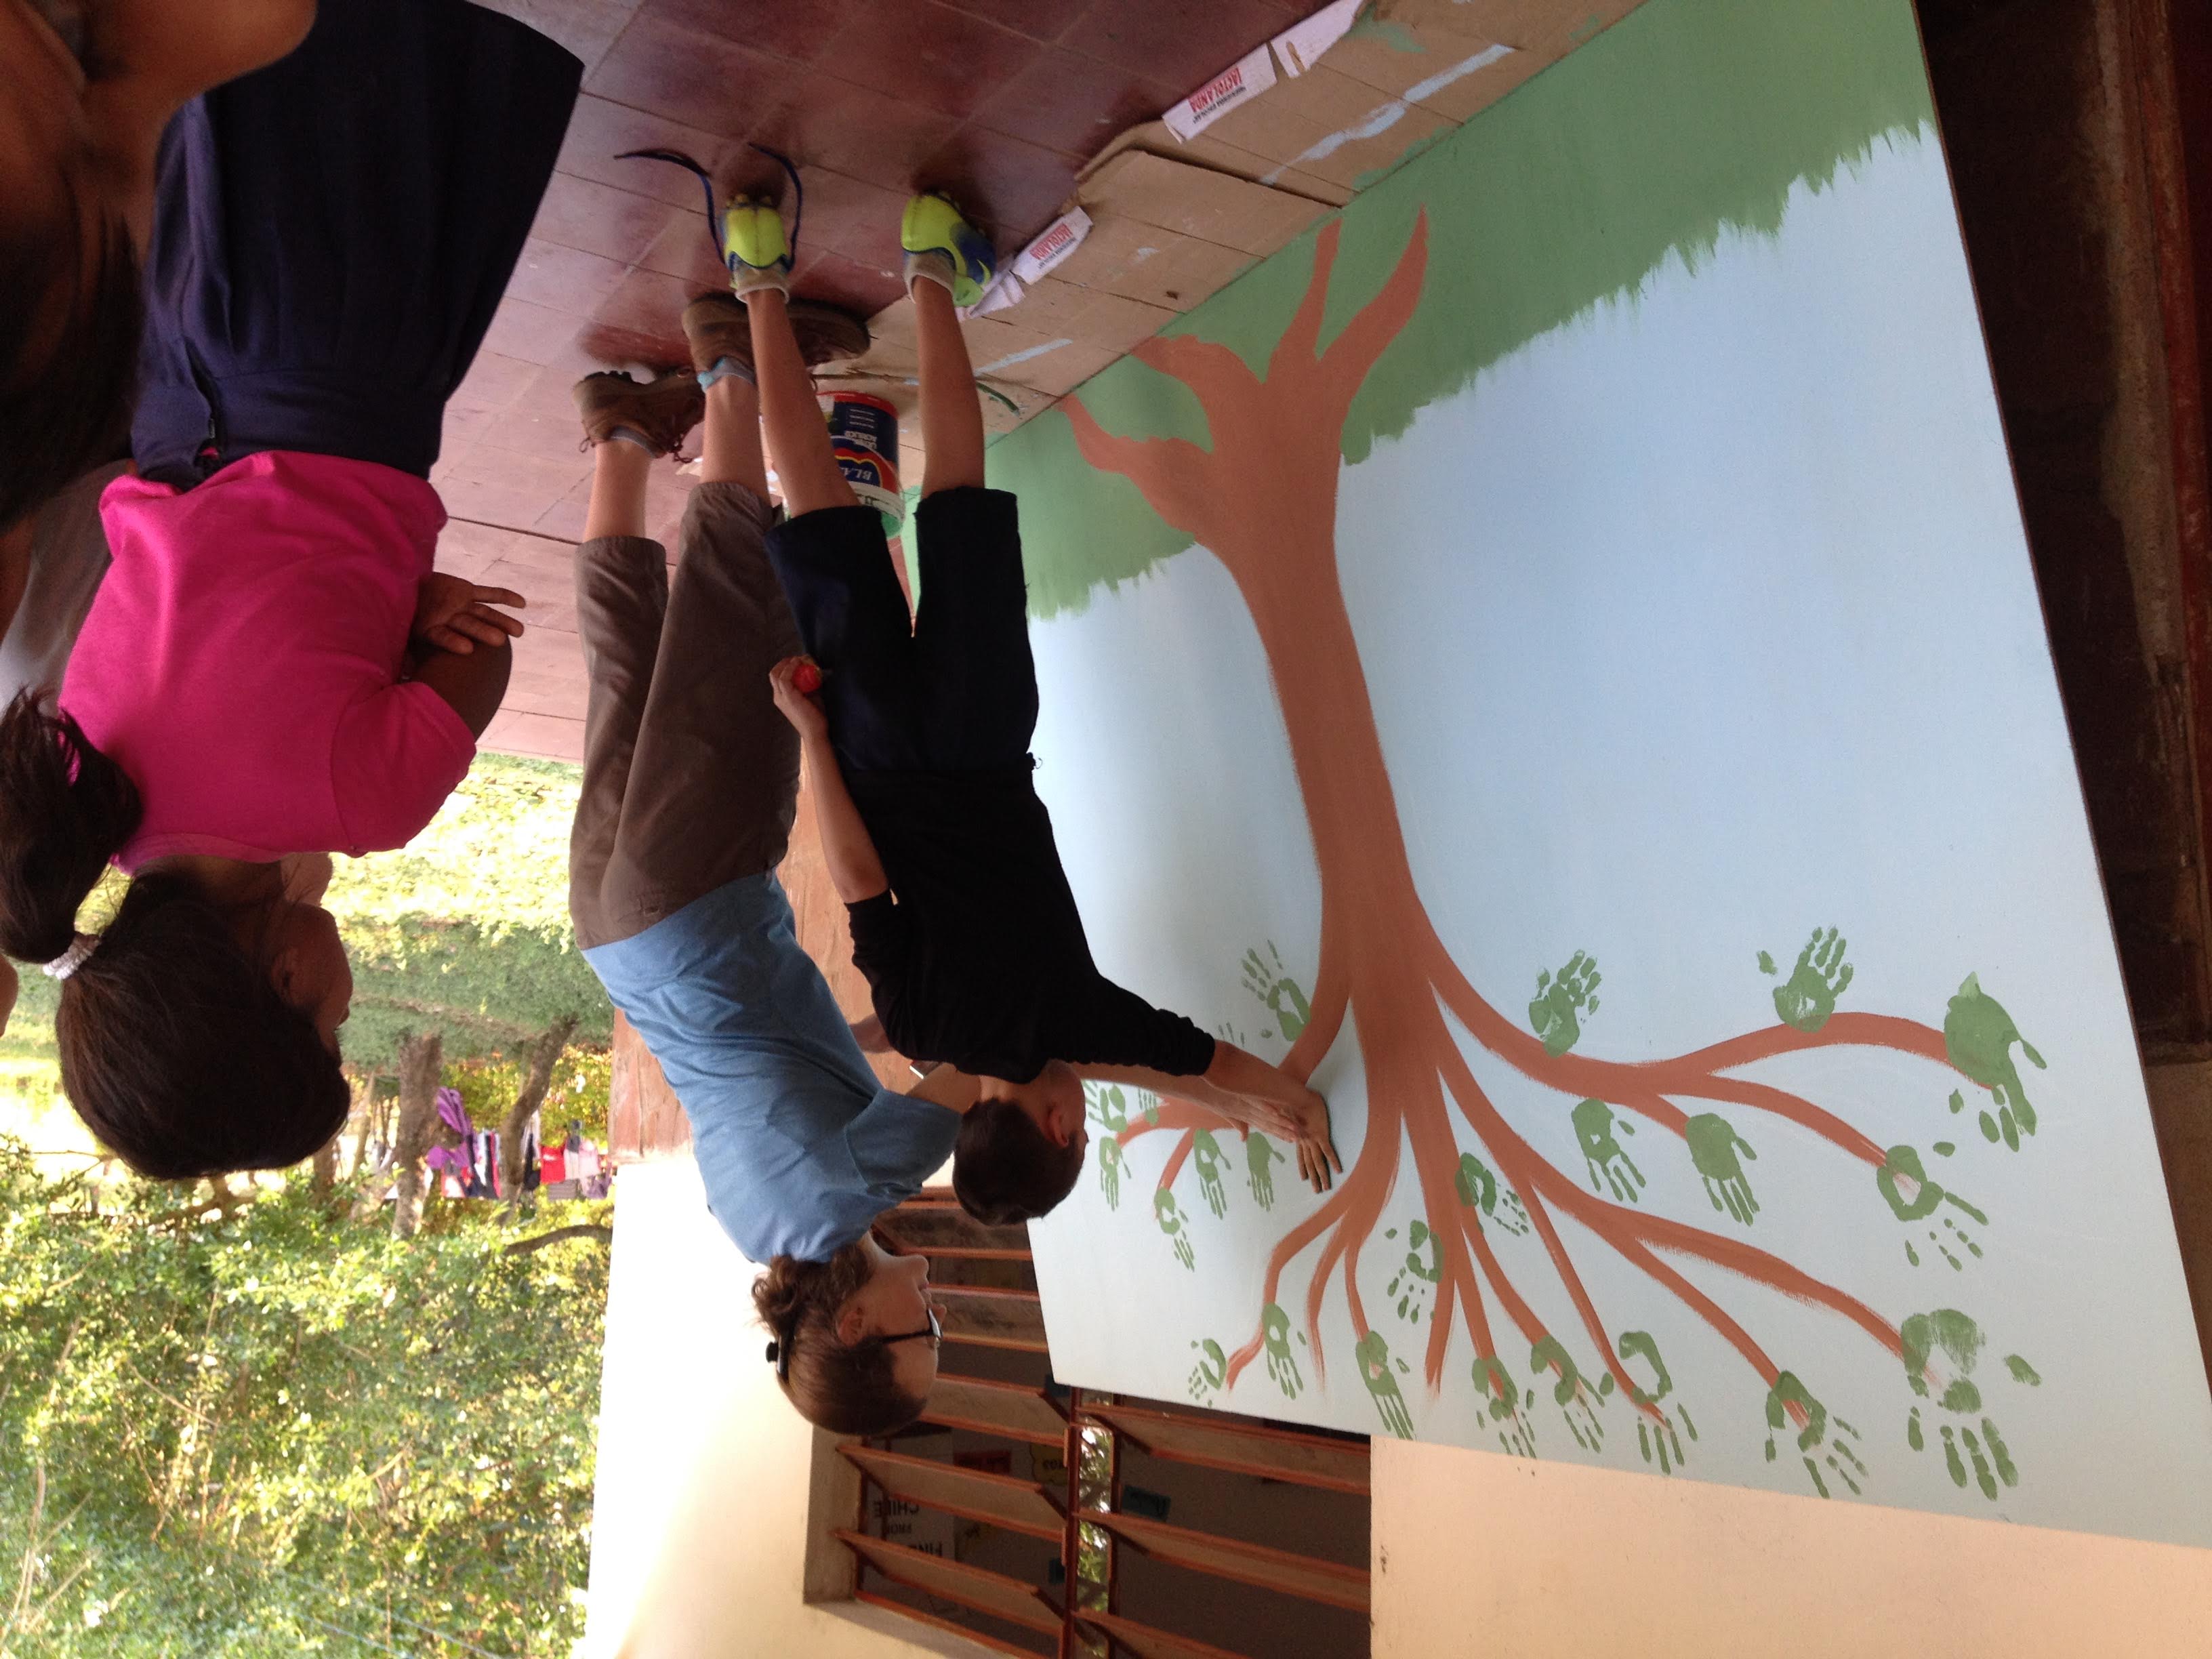 Bridget Johnson makes an environmentally-themed mural with kids at an elementary school in Paraguay during her Peace Corps service. 